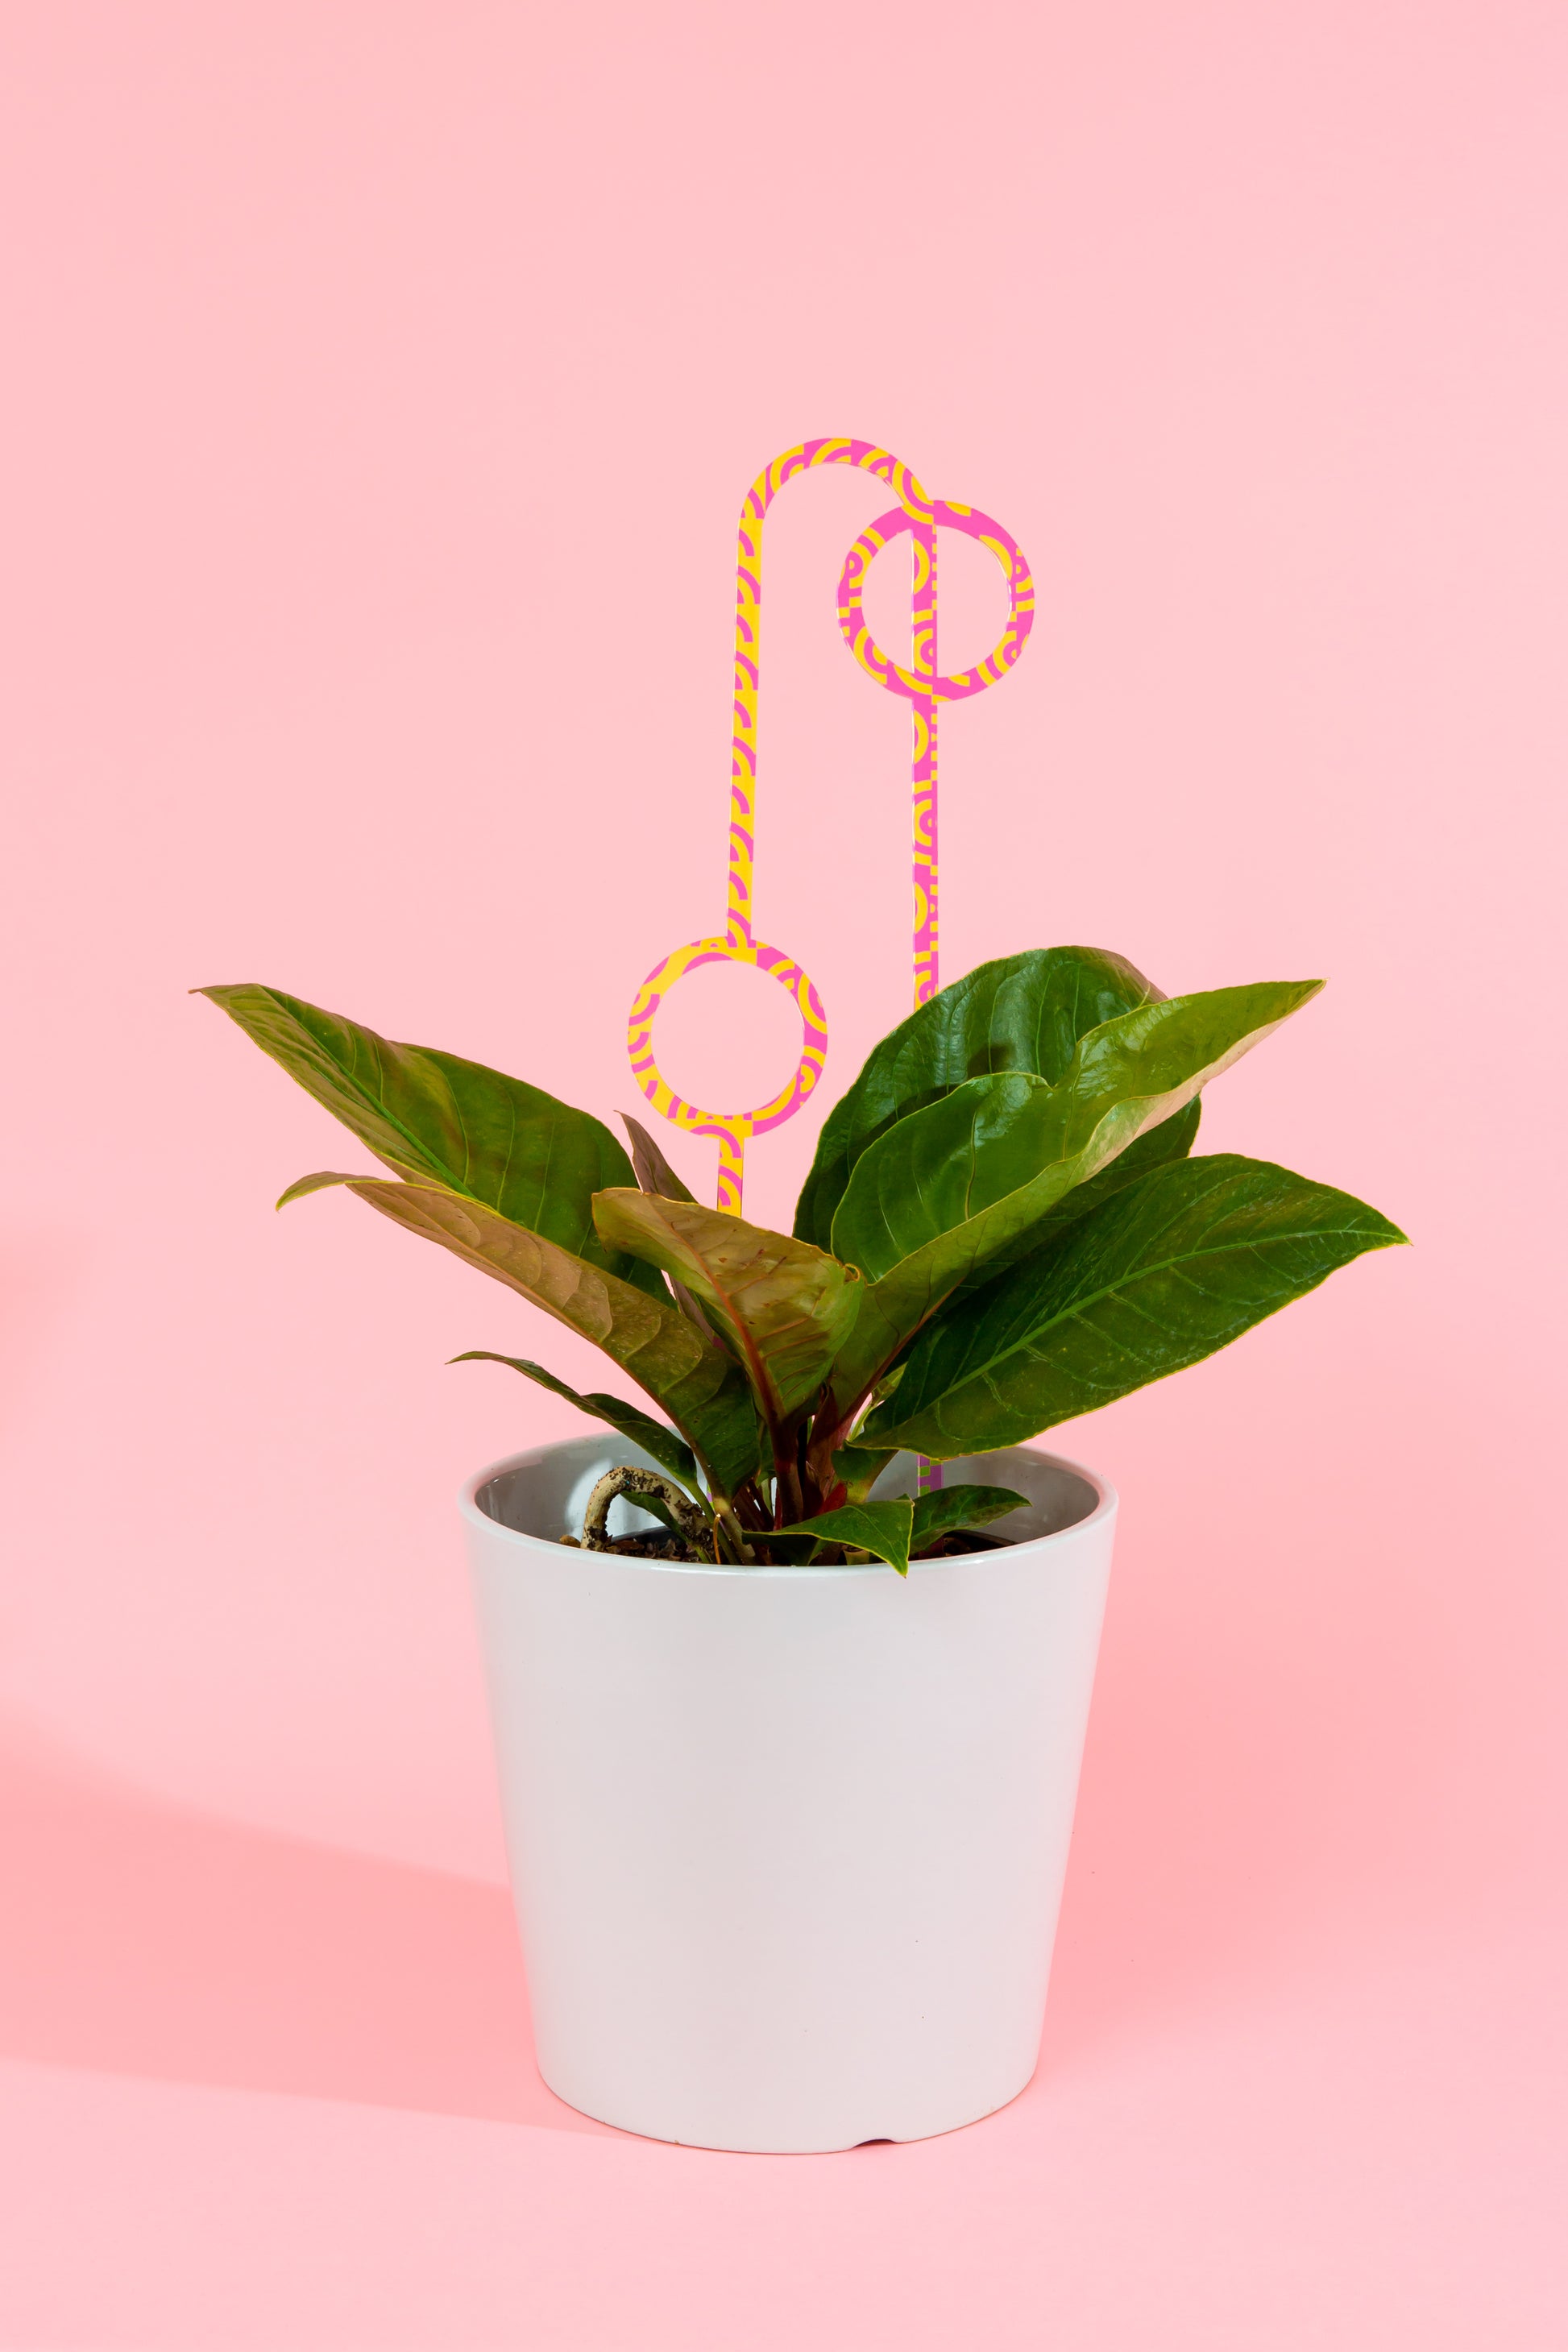 Acrylic Plant Stake 1 - Printed Large Pink & Lime Arch